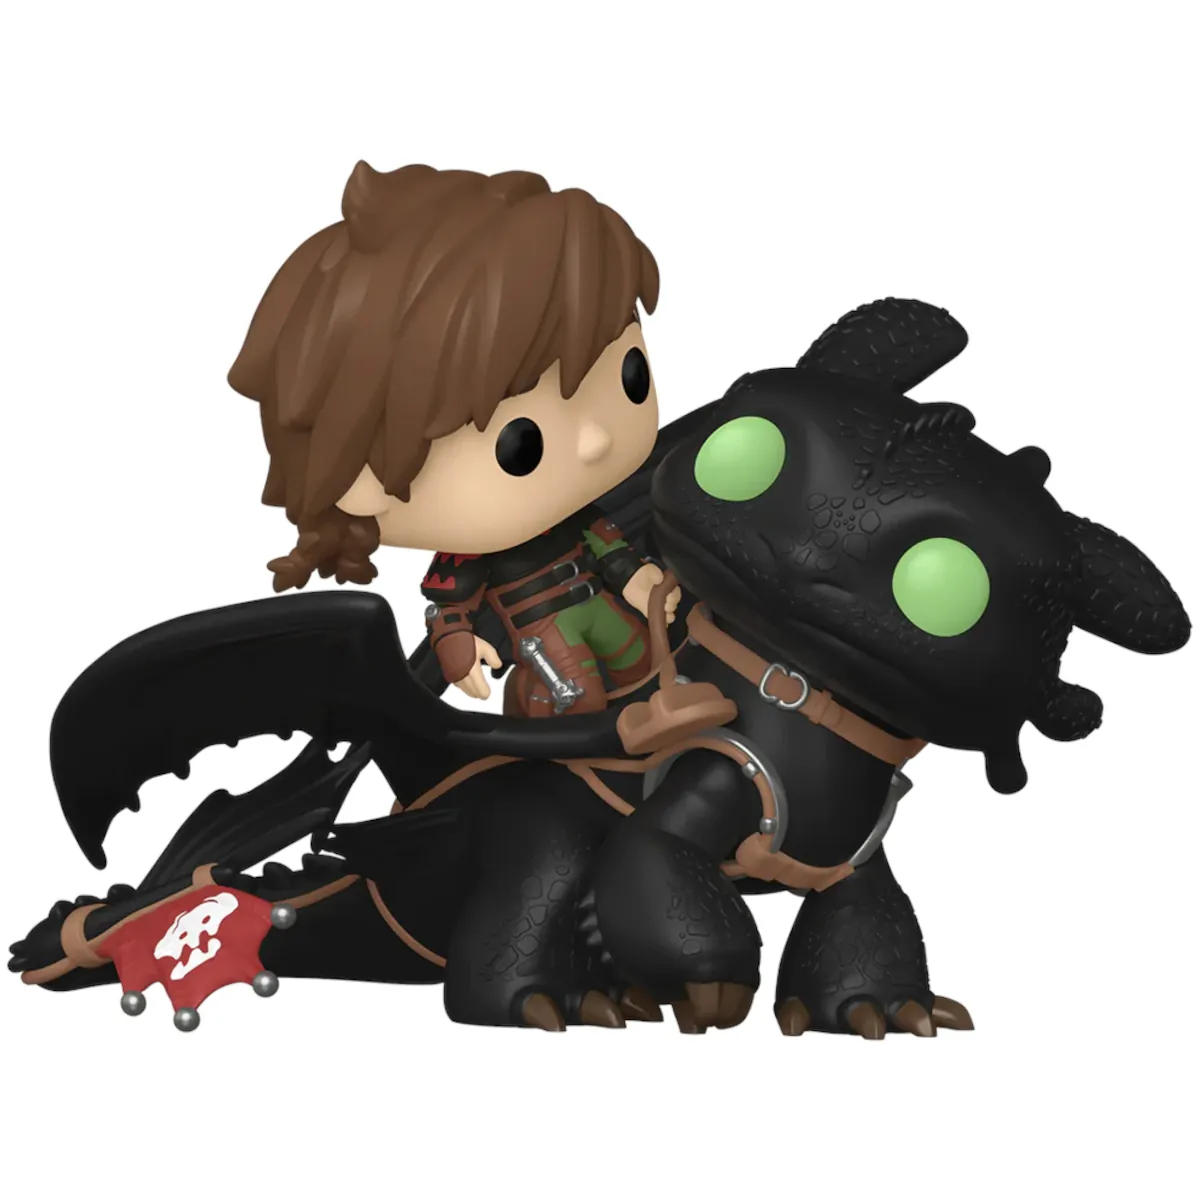 81181 Funko Pop! Rides - How To Train Your Dragon 2 - Hiccup with Toothless Collectable Vinyl Figure